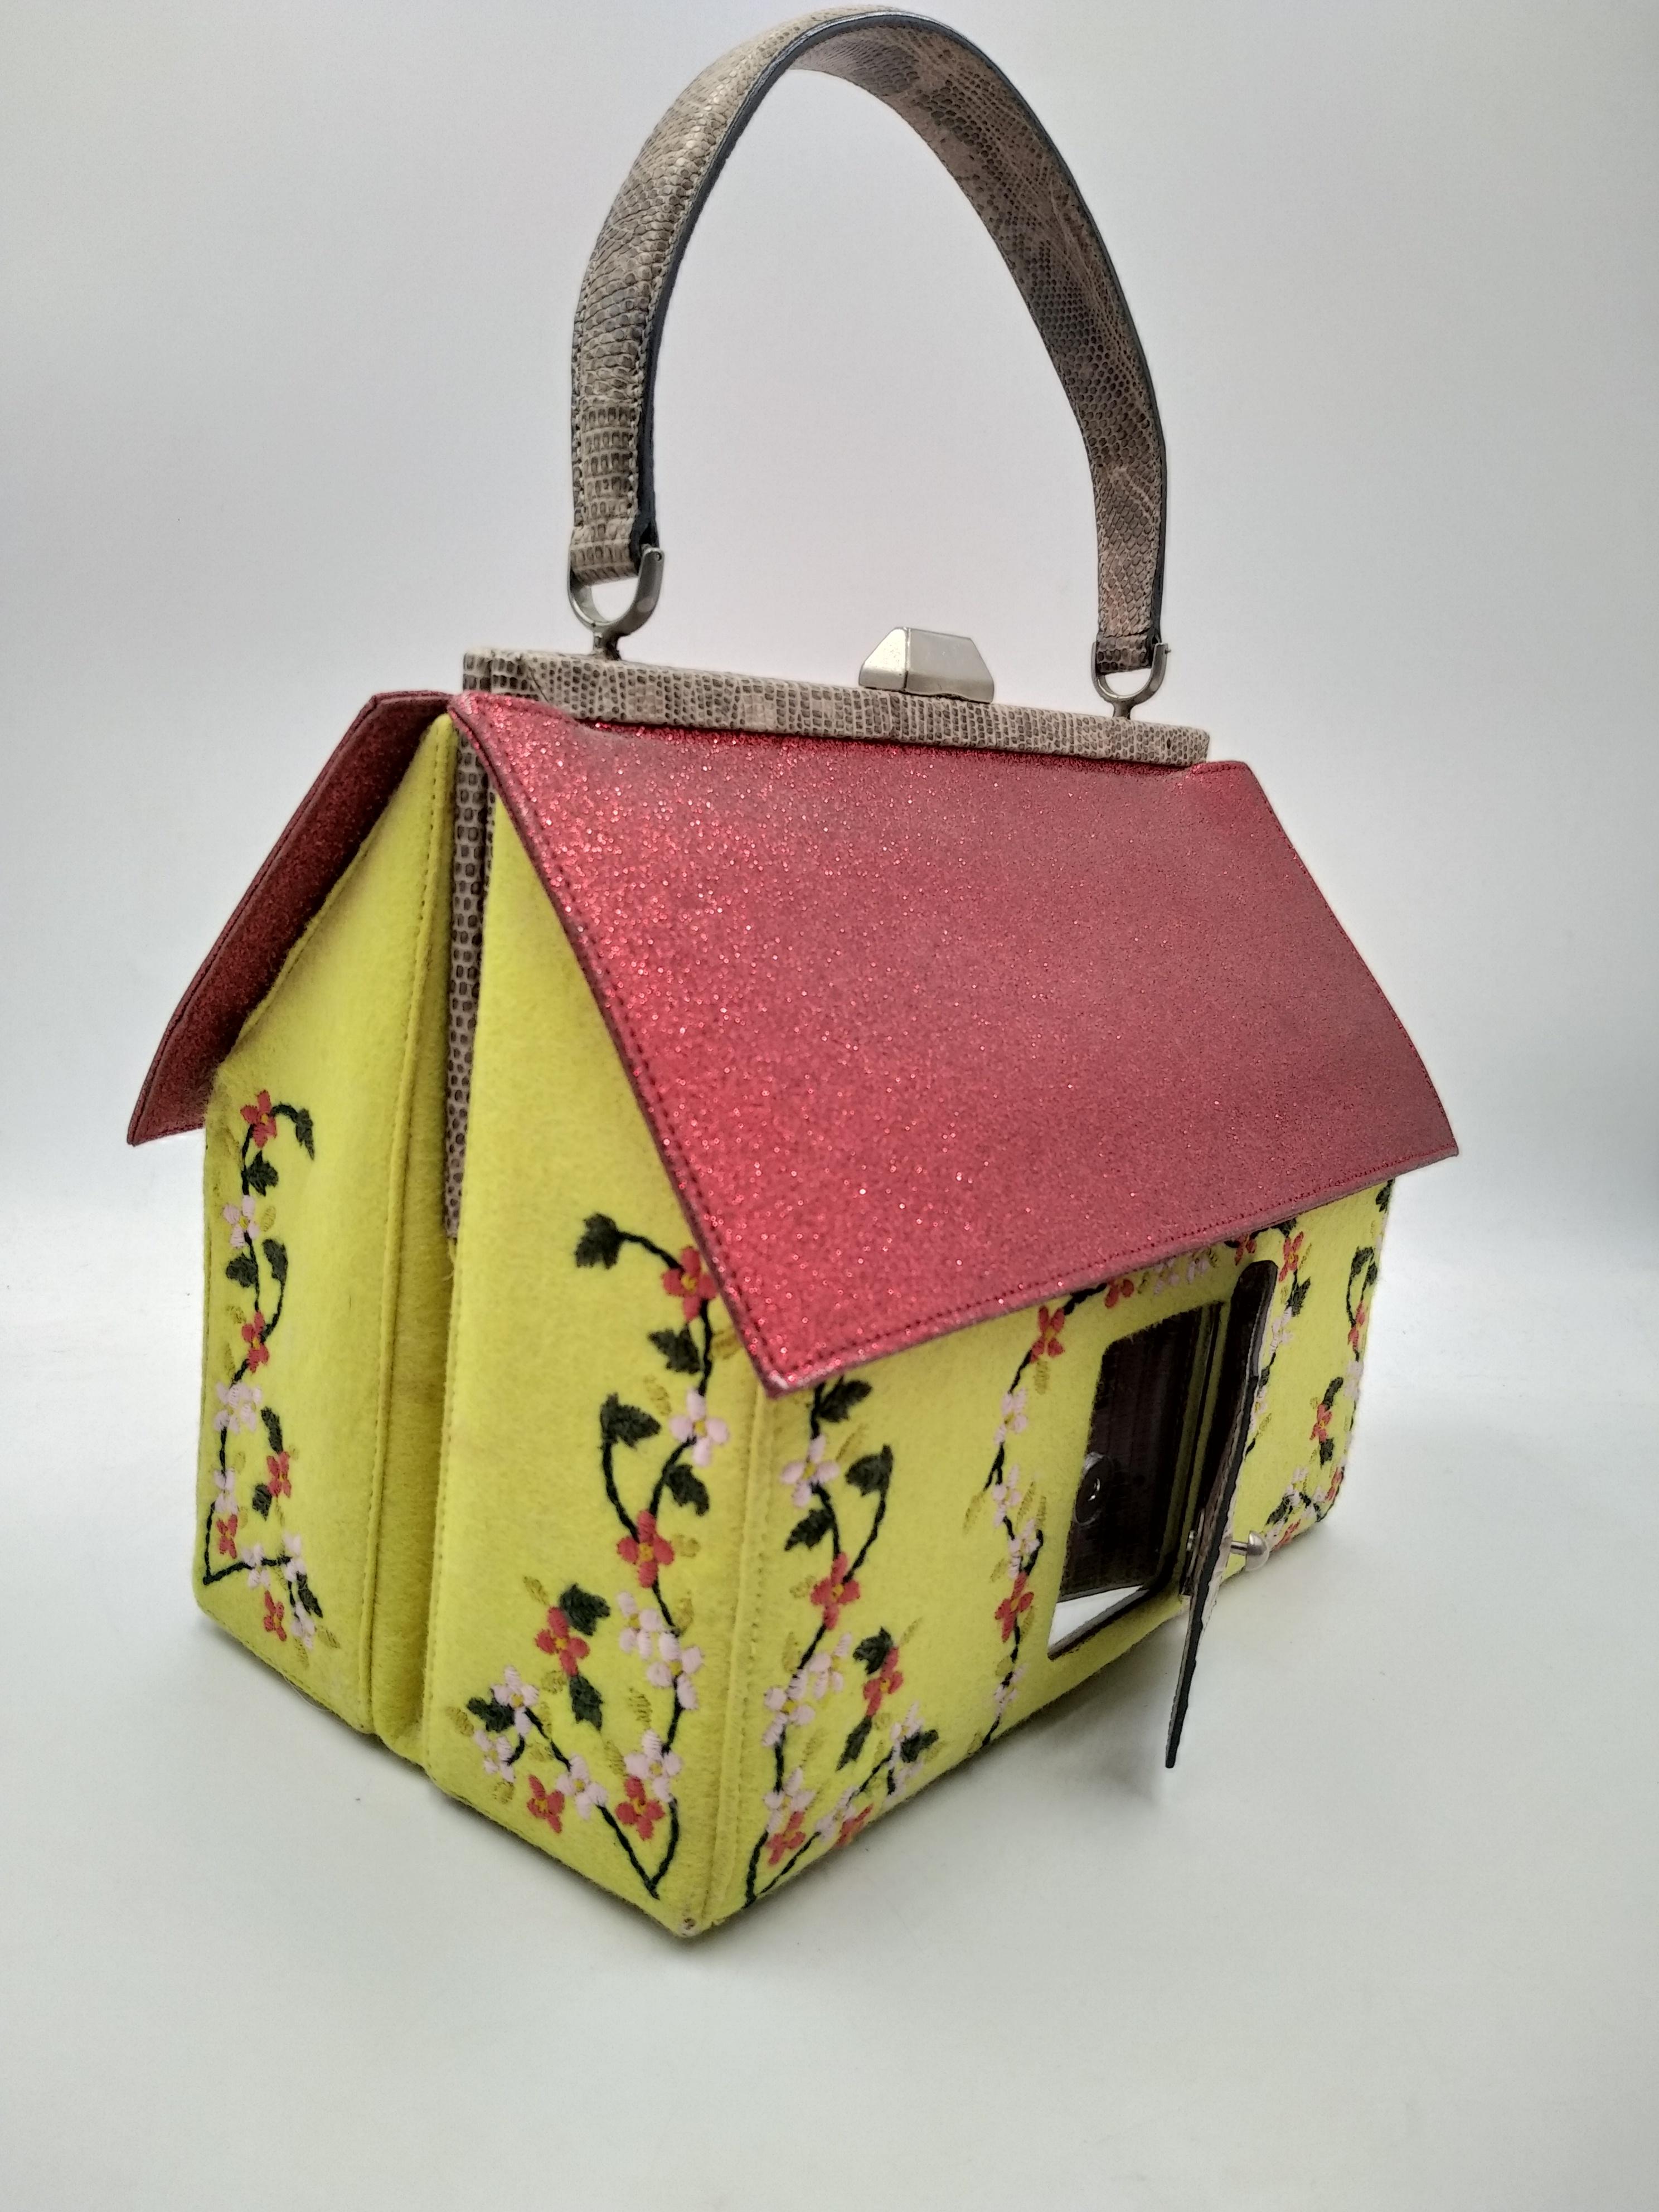 Moschino Hansel and Gretel gingerbread house bag In Good Condition For Sale In Lugano, Ticino